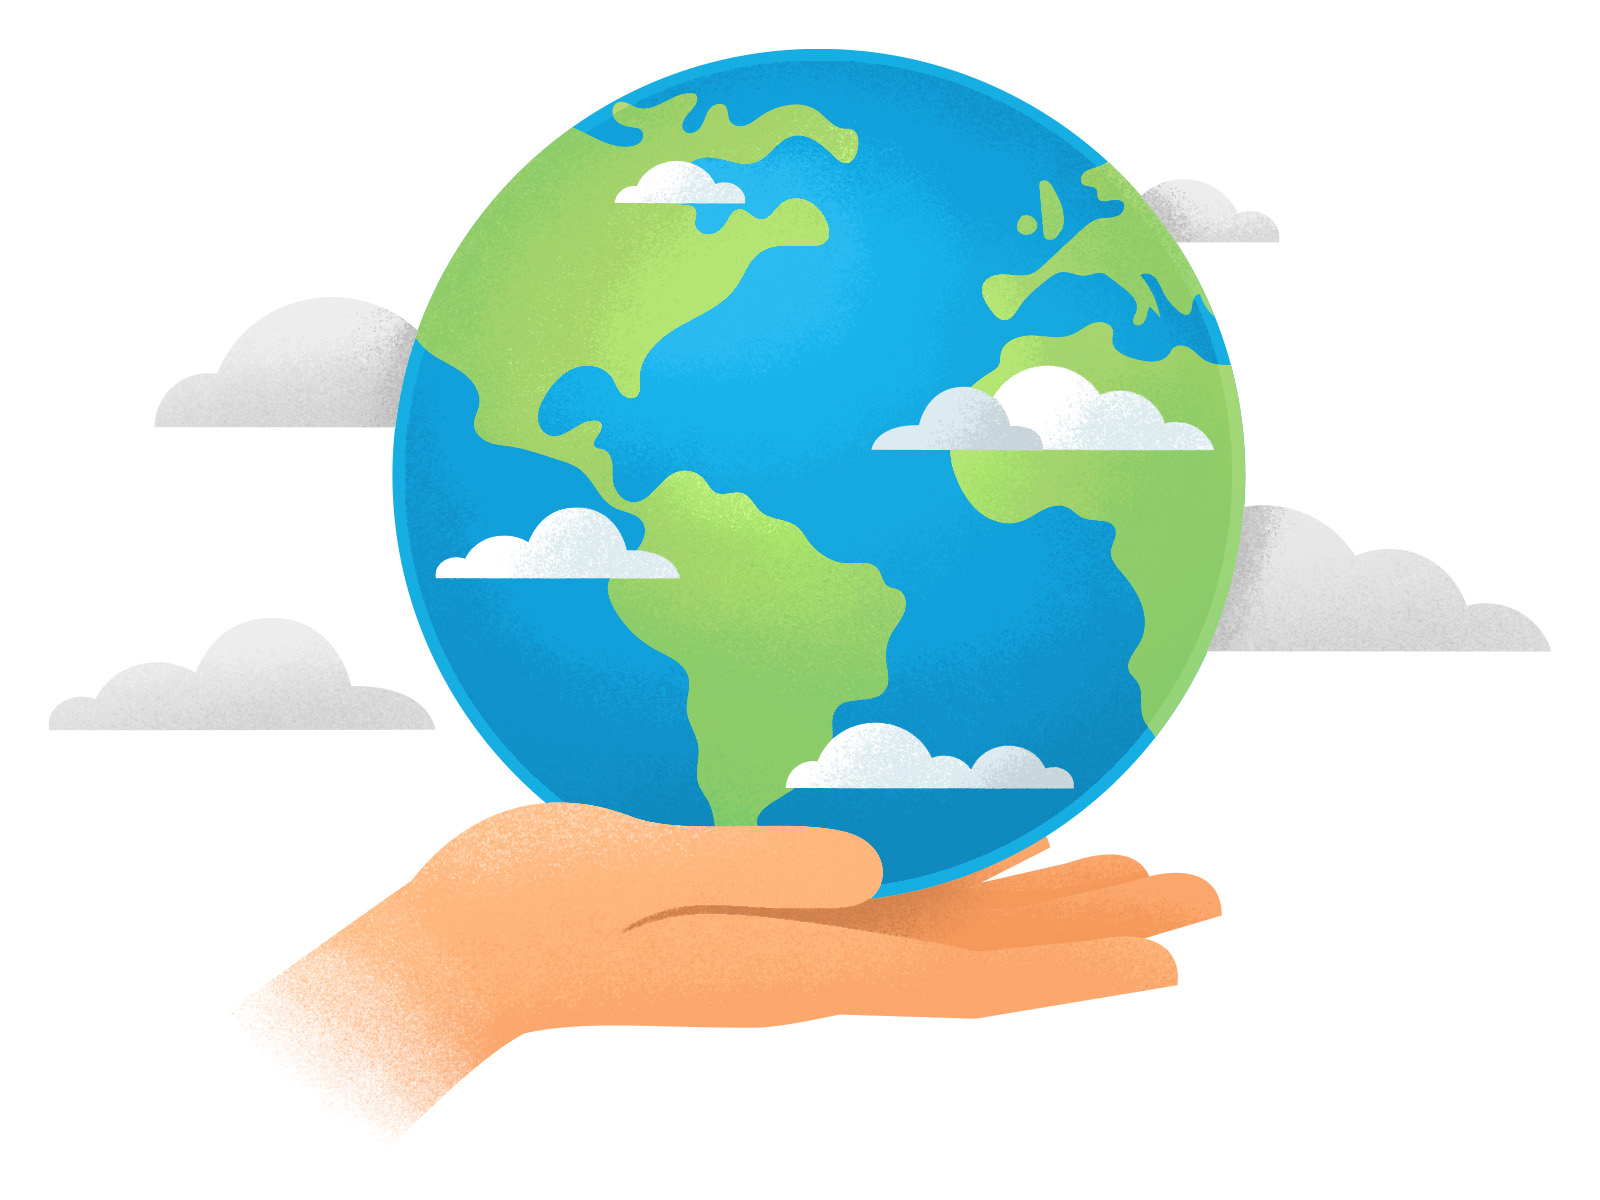 Illustration of a hand holding a globe with clouds around it